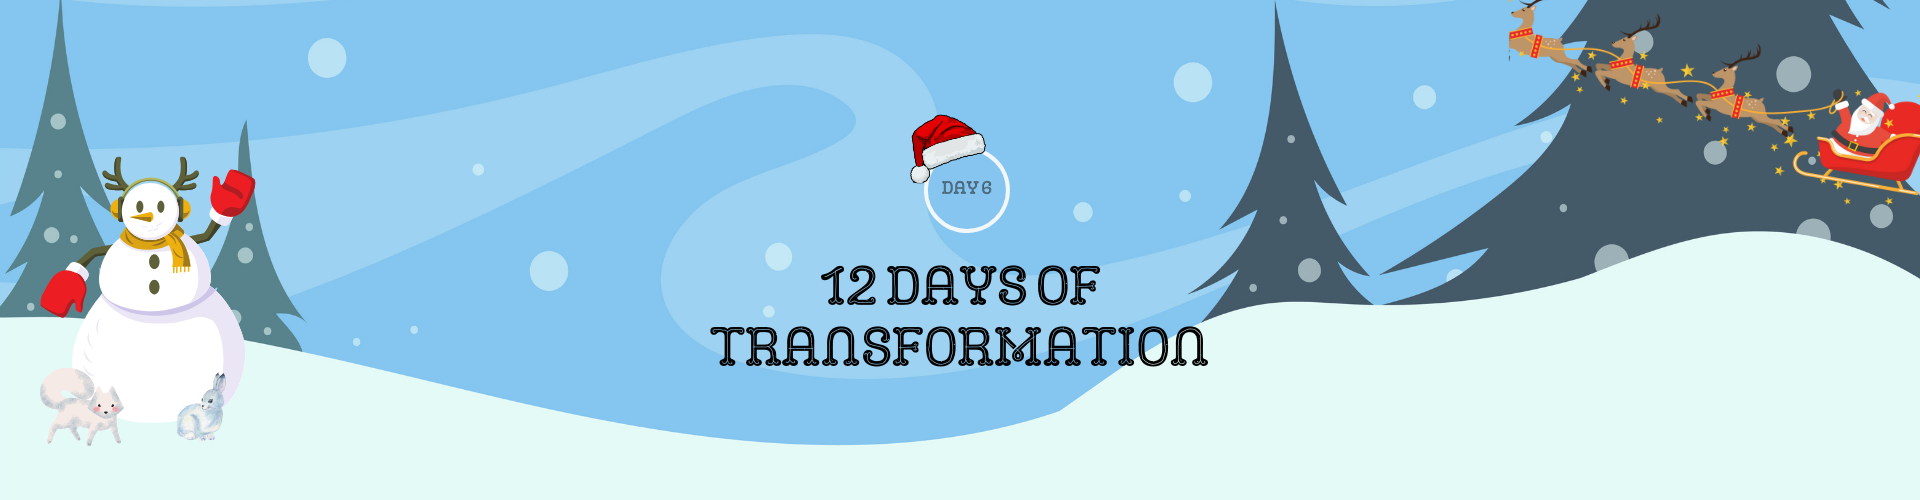 12 Days of Transformation Blog Banner | Festive winter holidays-themed banner with a cheerful snowman and Santa Claus riding his sleigh | Day 6